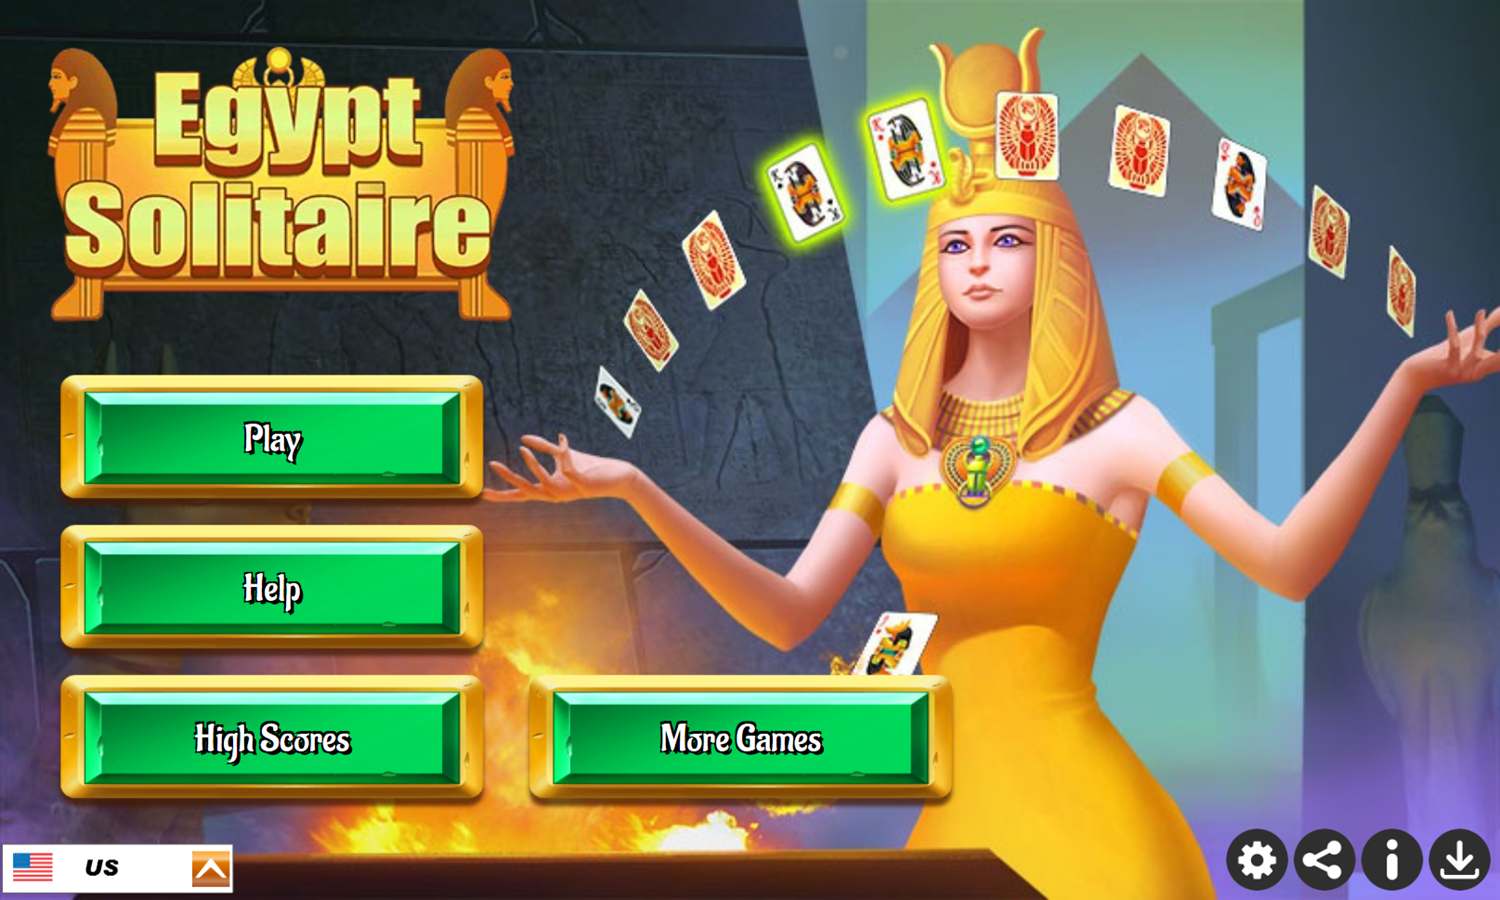 Egypt Solitaire Game Welcome Screen Screenshot.